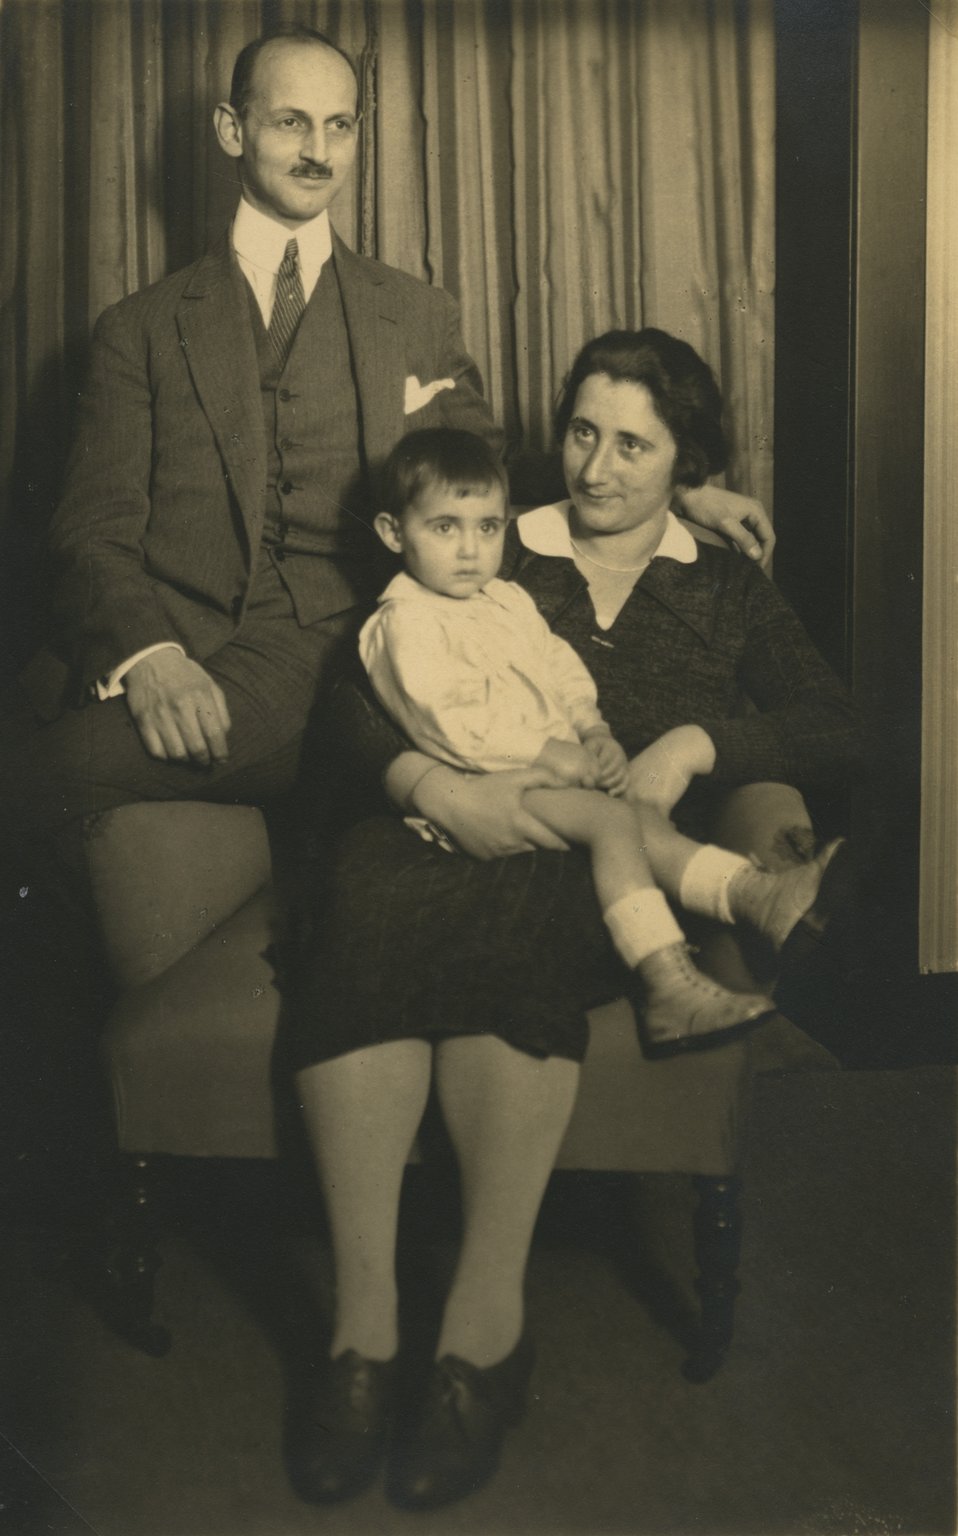 Otto, Edith, and Margot, 1928.